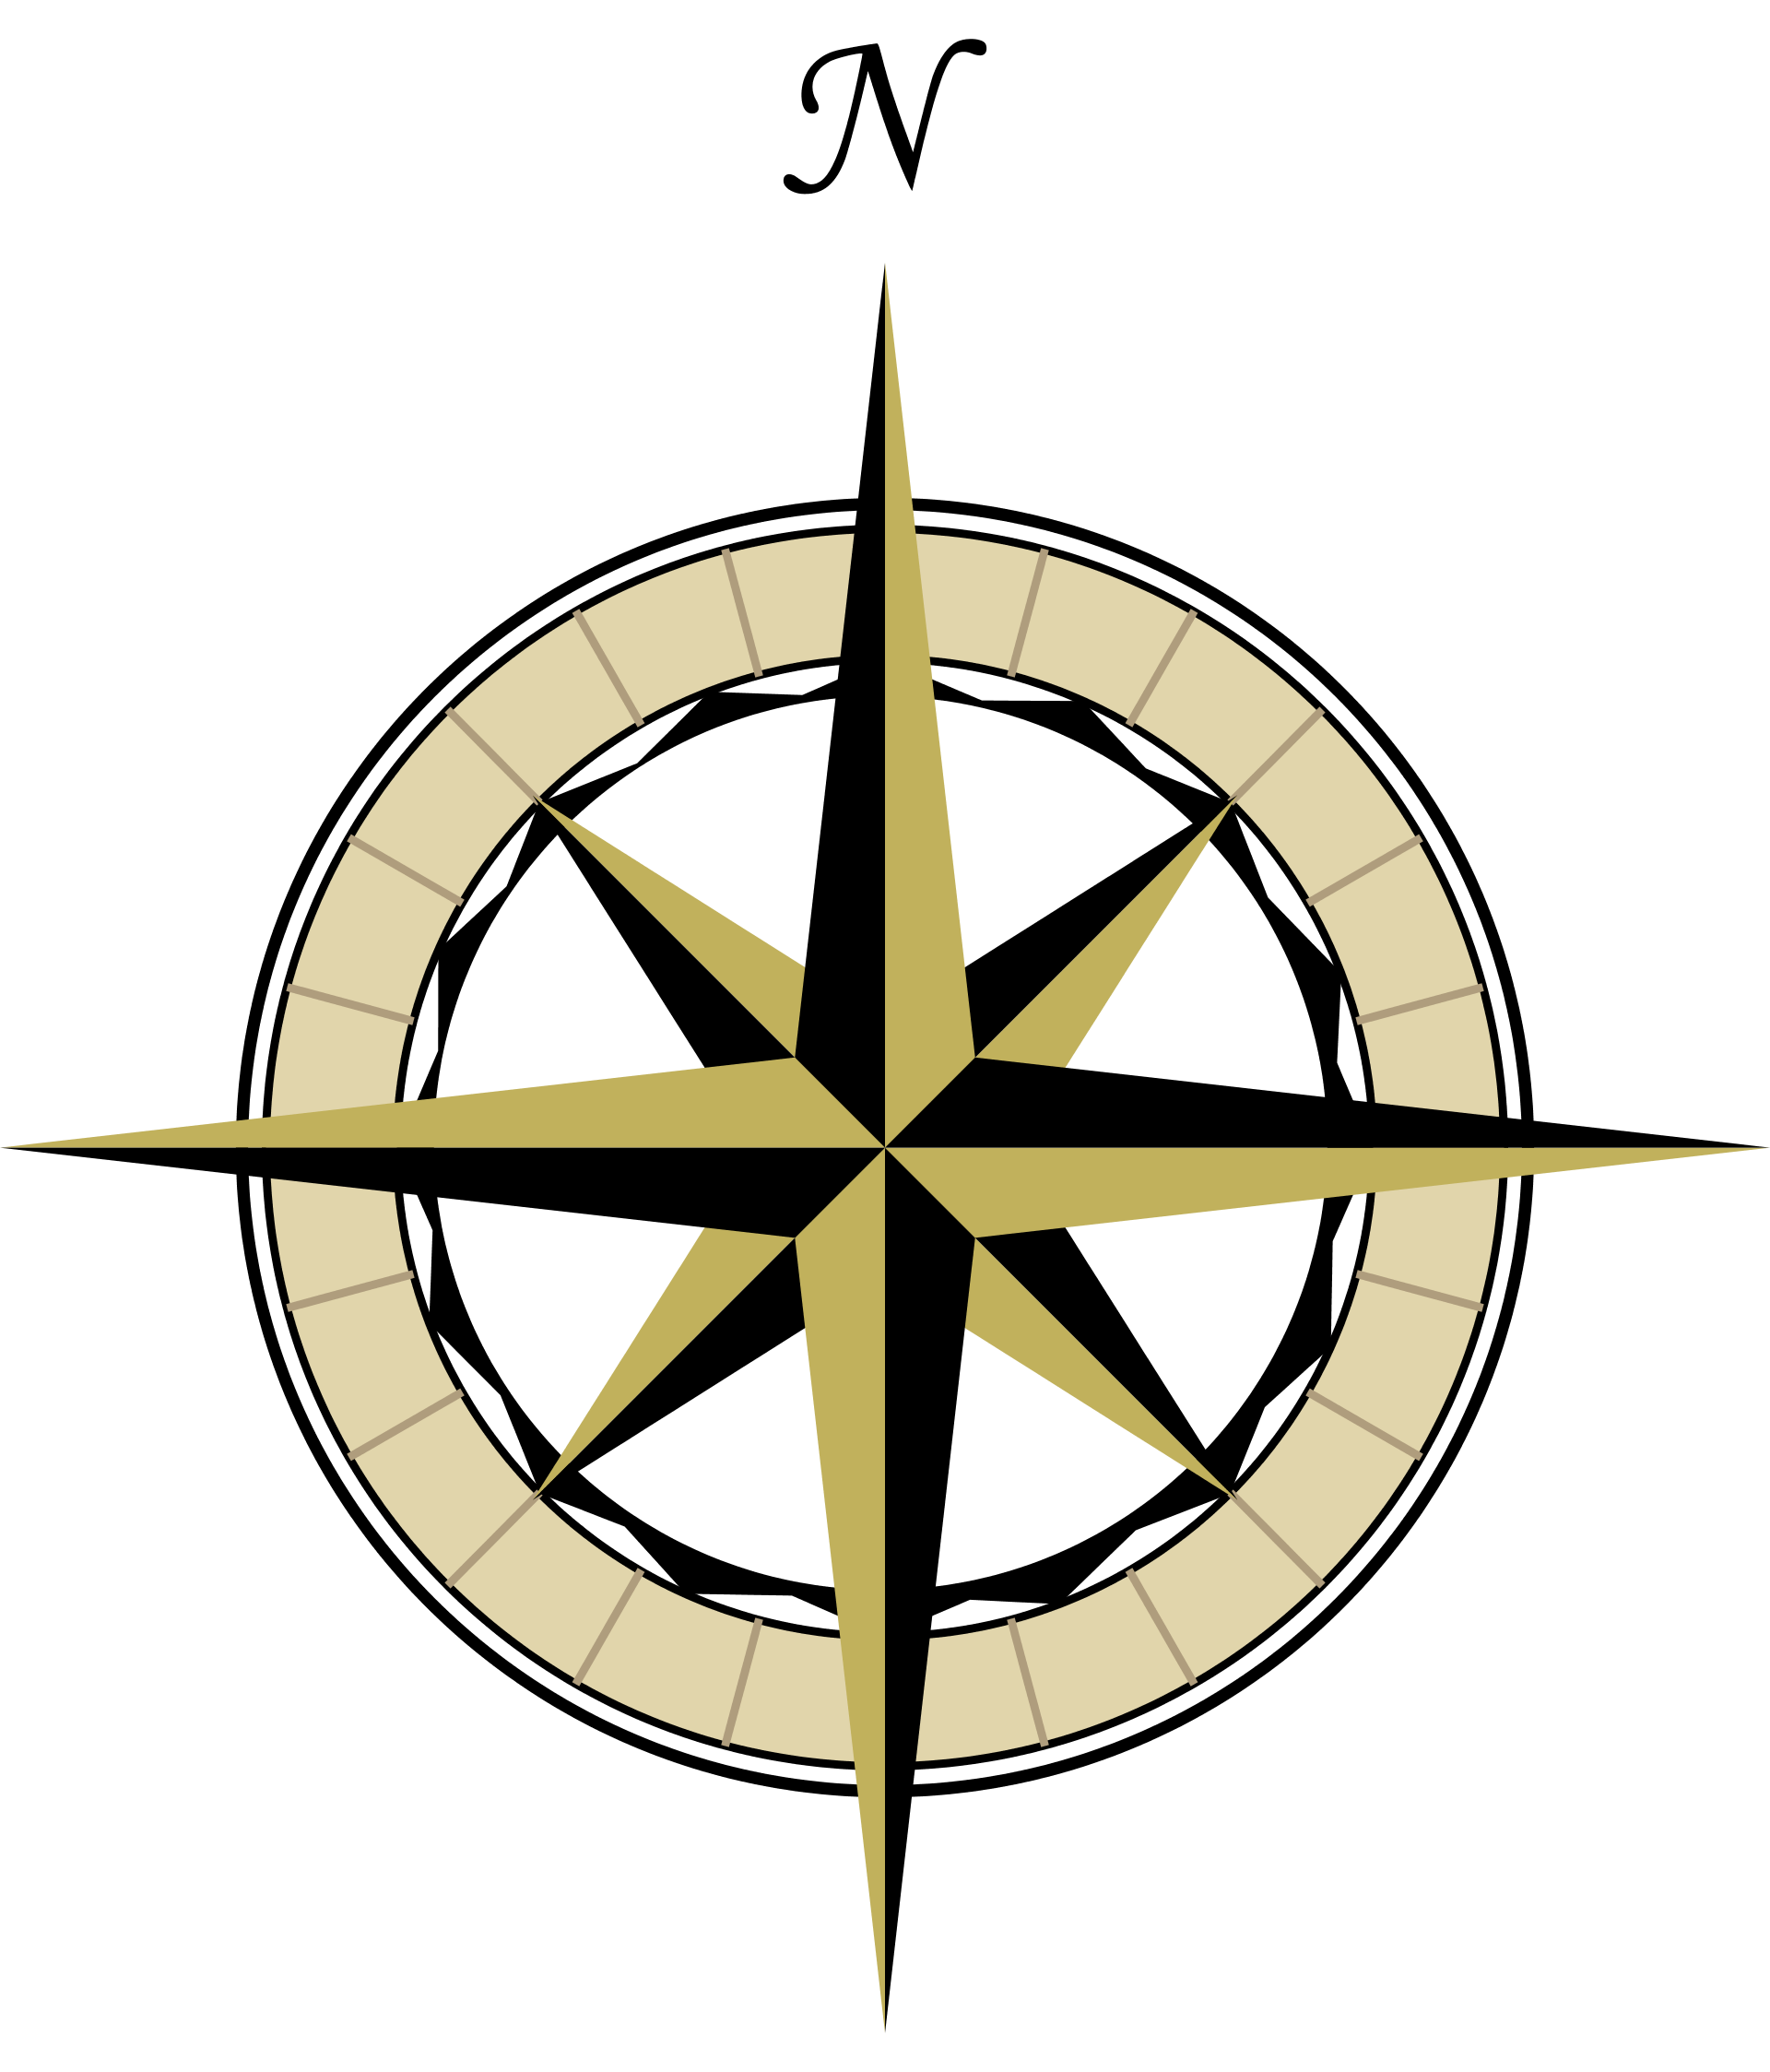 Compass Rose 1 Flowers 2011 Clip Art SVG openclipart.org commons ...